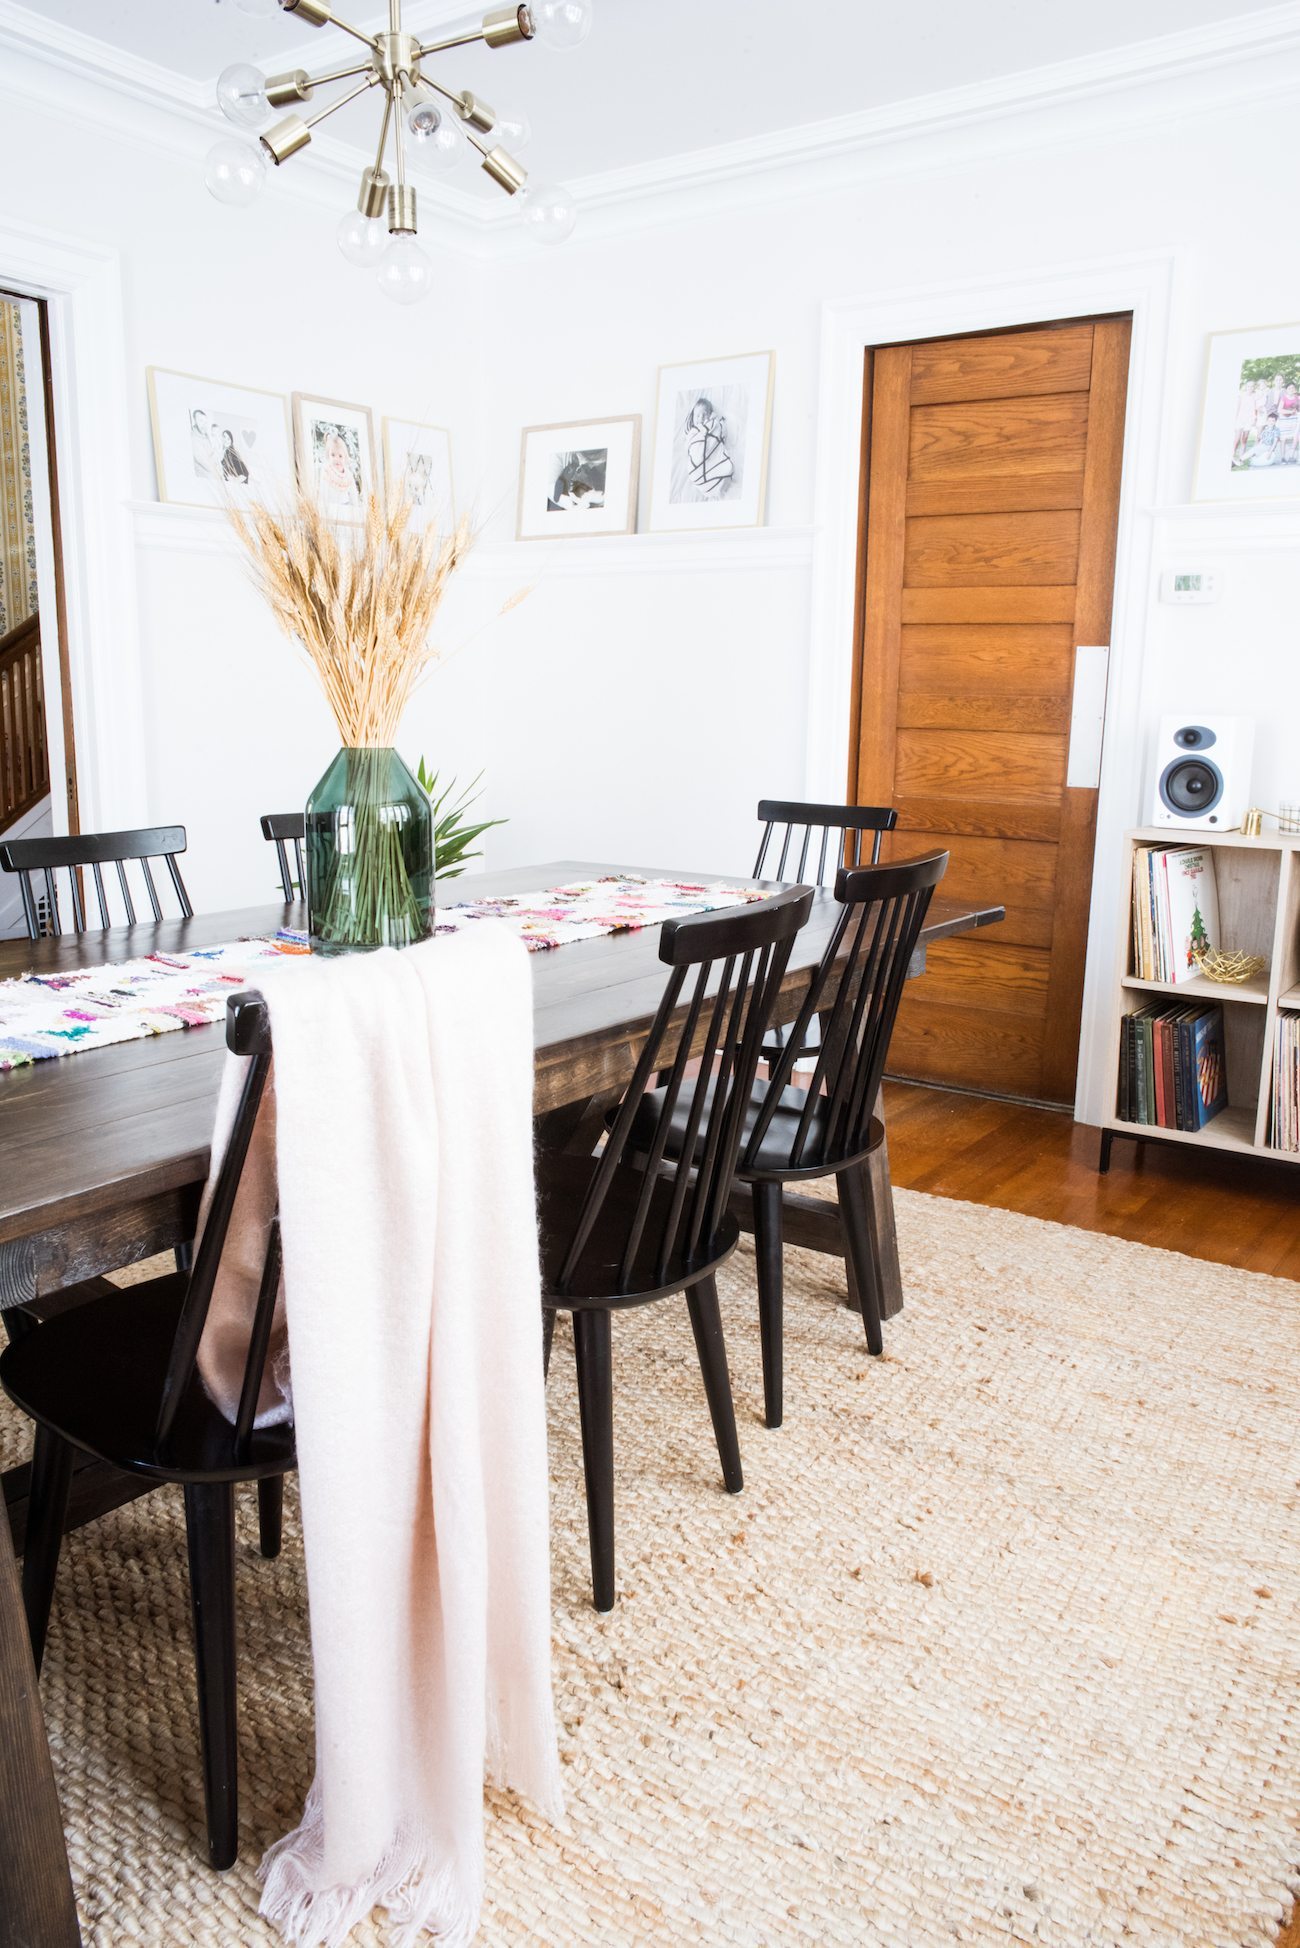 The Sweetest Occasion Dining Room Renovation | Modern classic dining room decor from @cydconverse